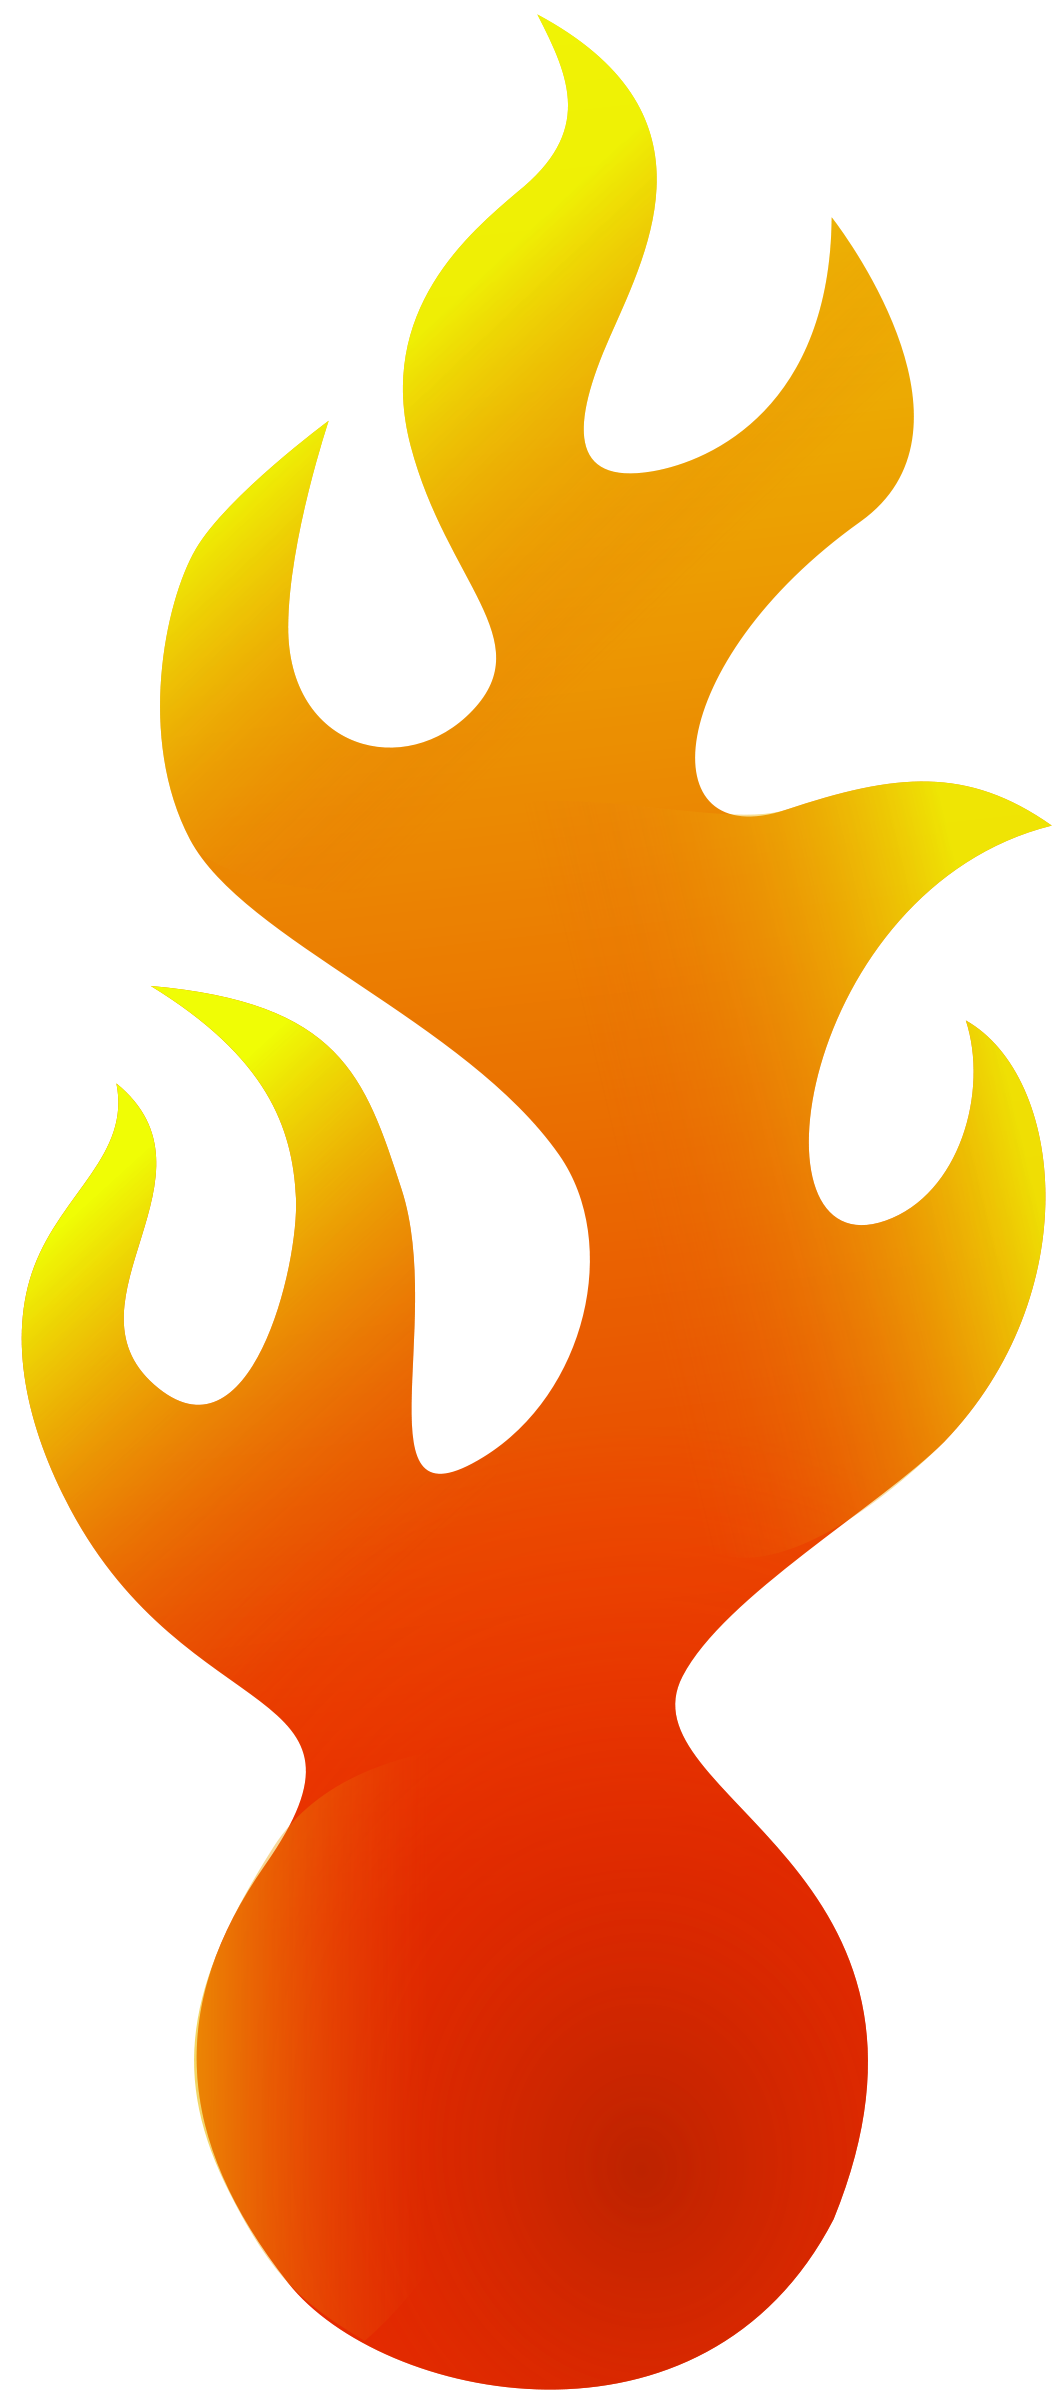 fire burning clipart - photo #9